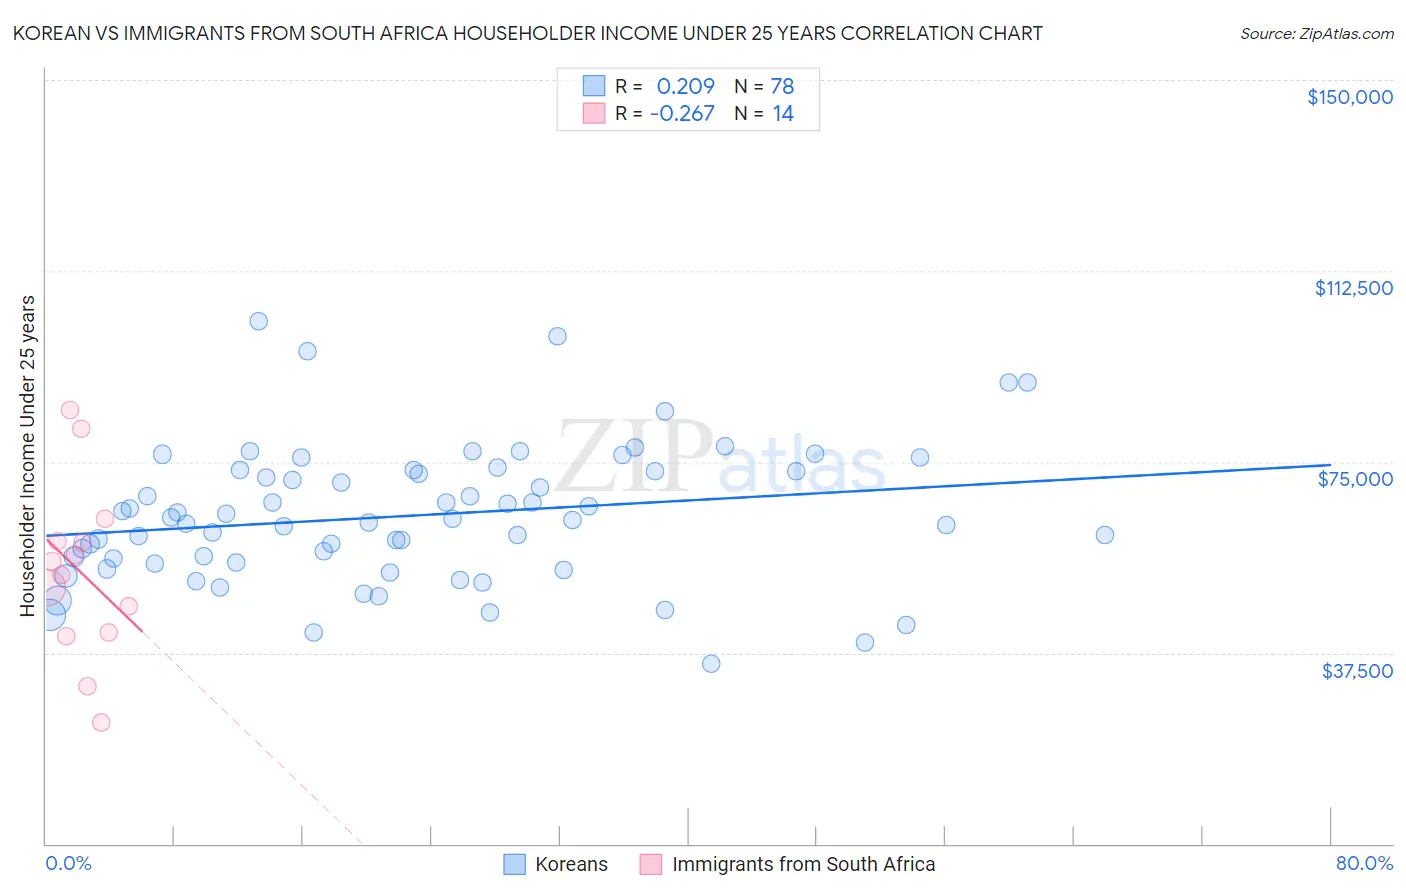 Korean vs Immigrants from South Africa Householder Income Under 25 years